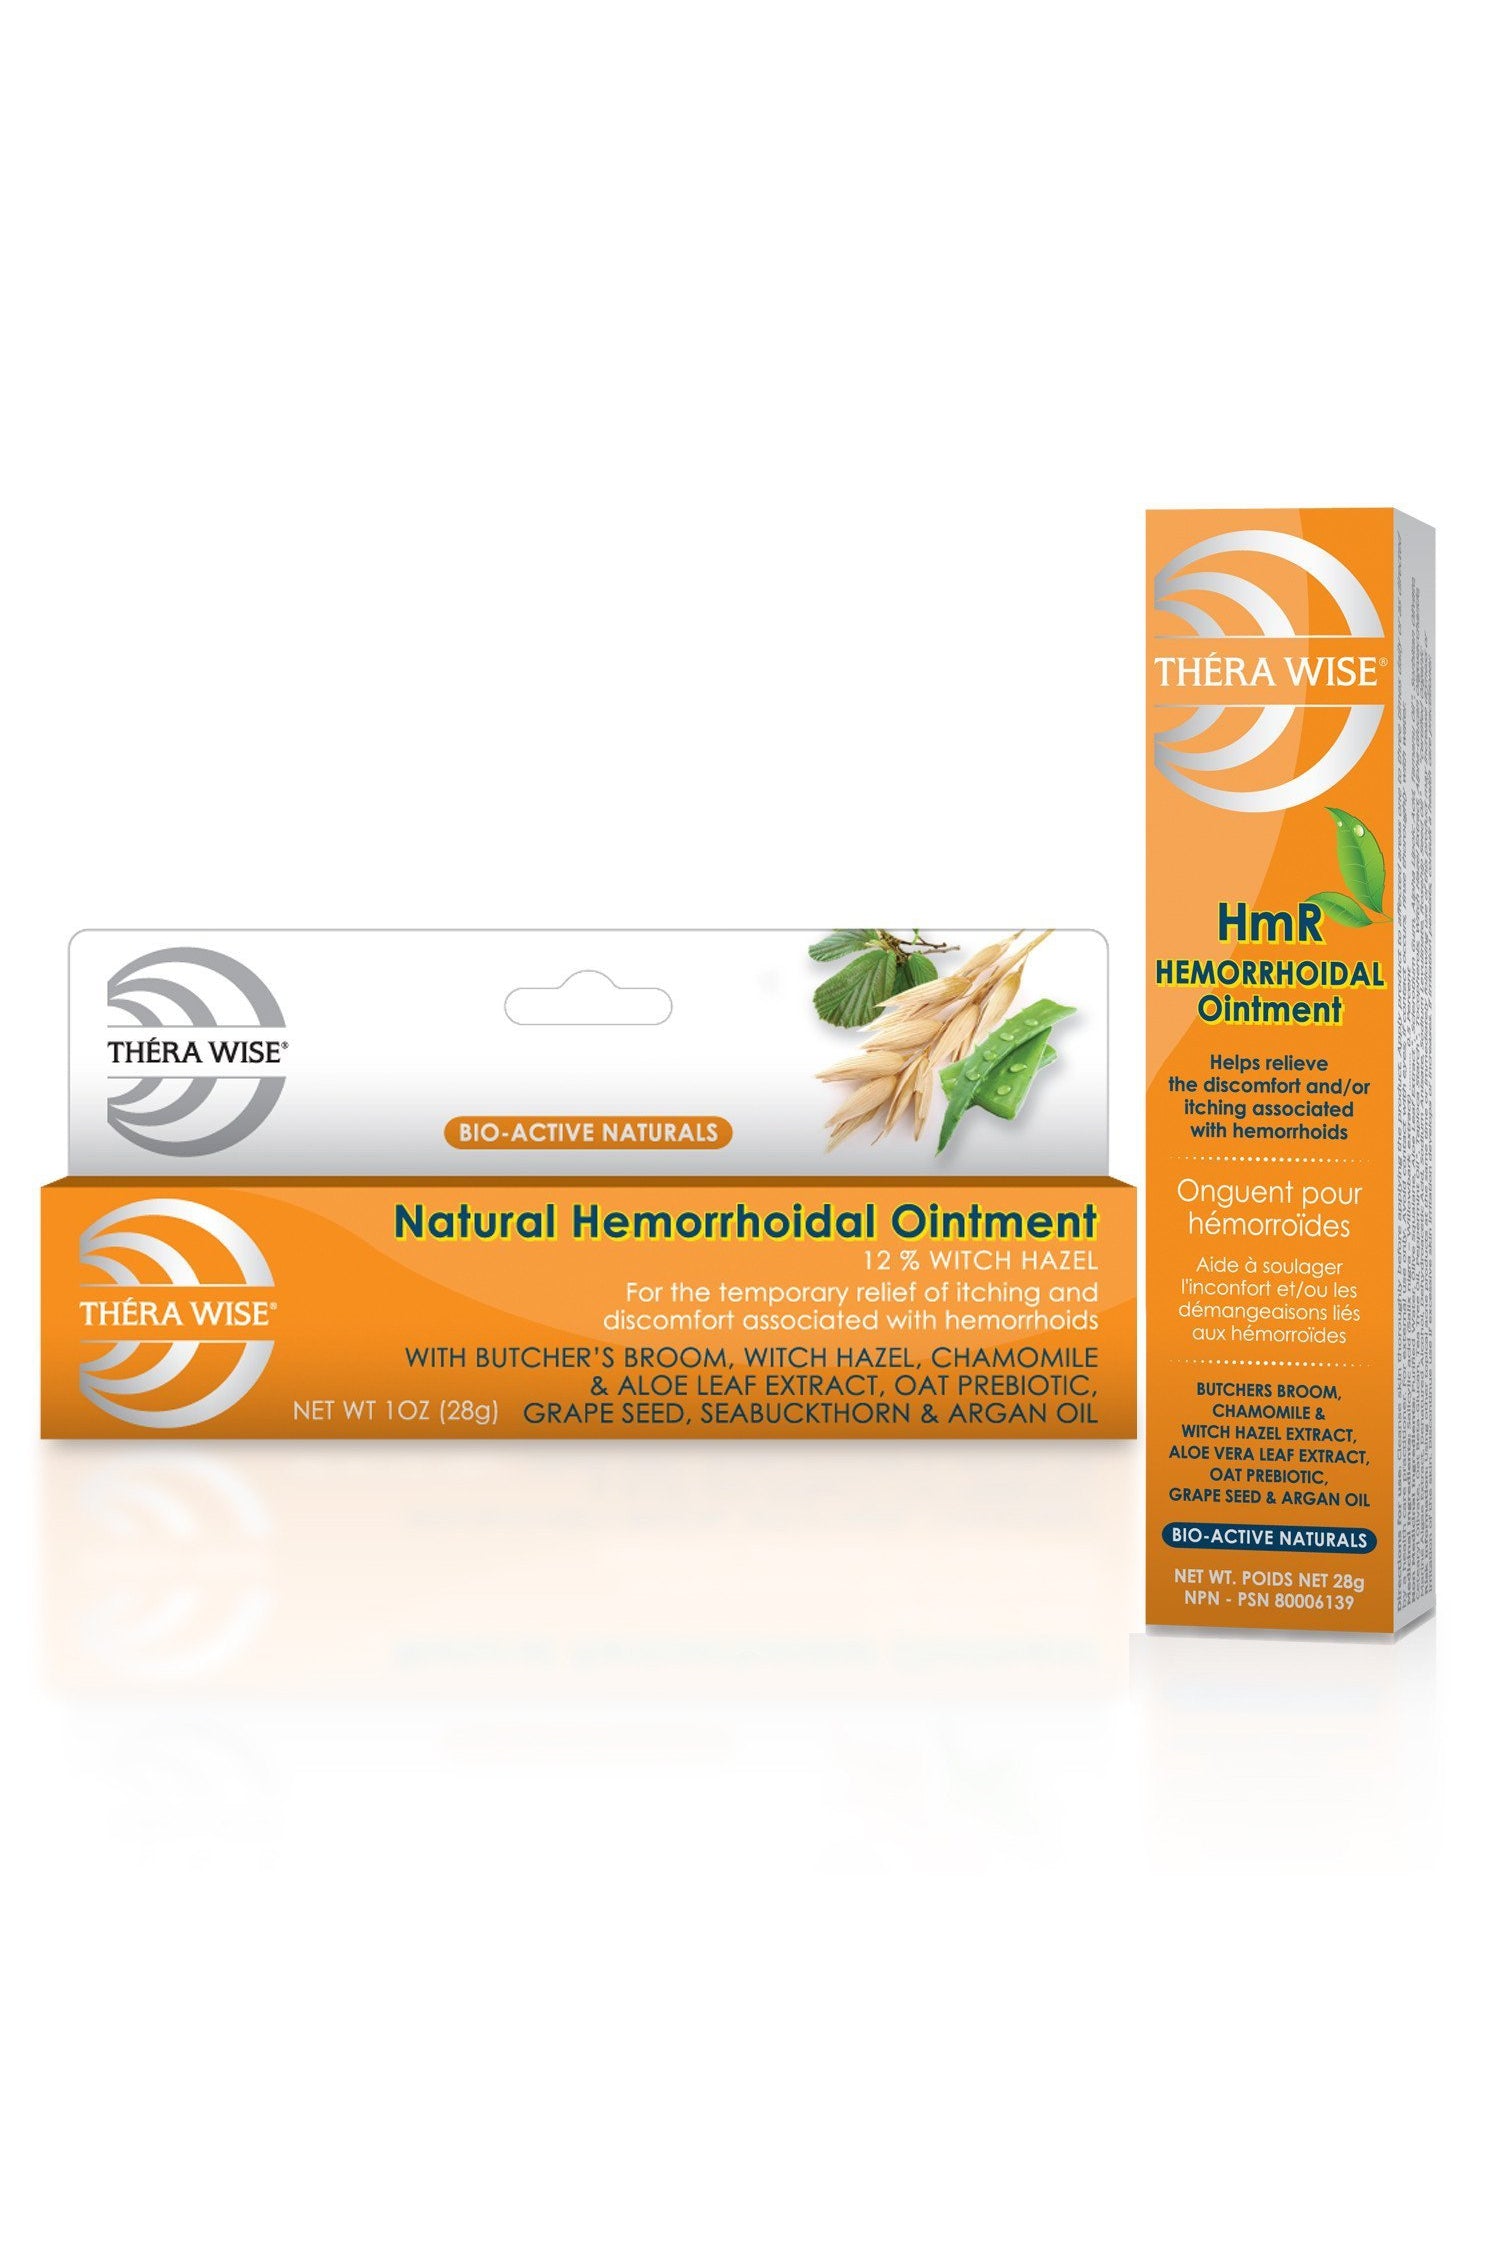 Therawise Natural Bio-Active Hemorrhoidal Ointment 28g